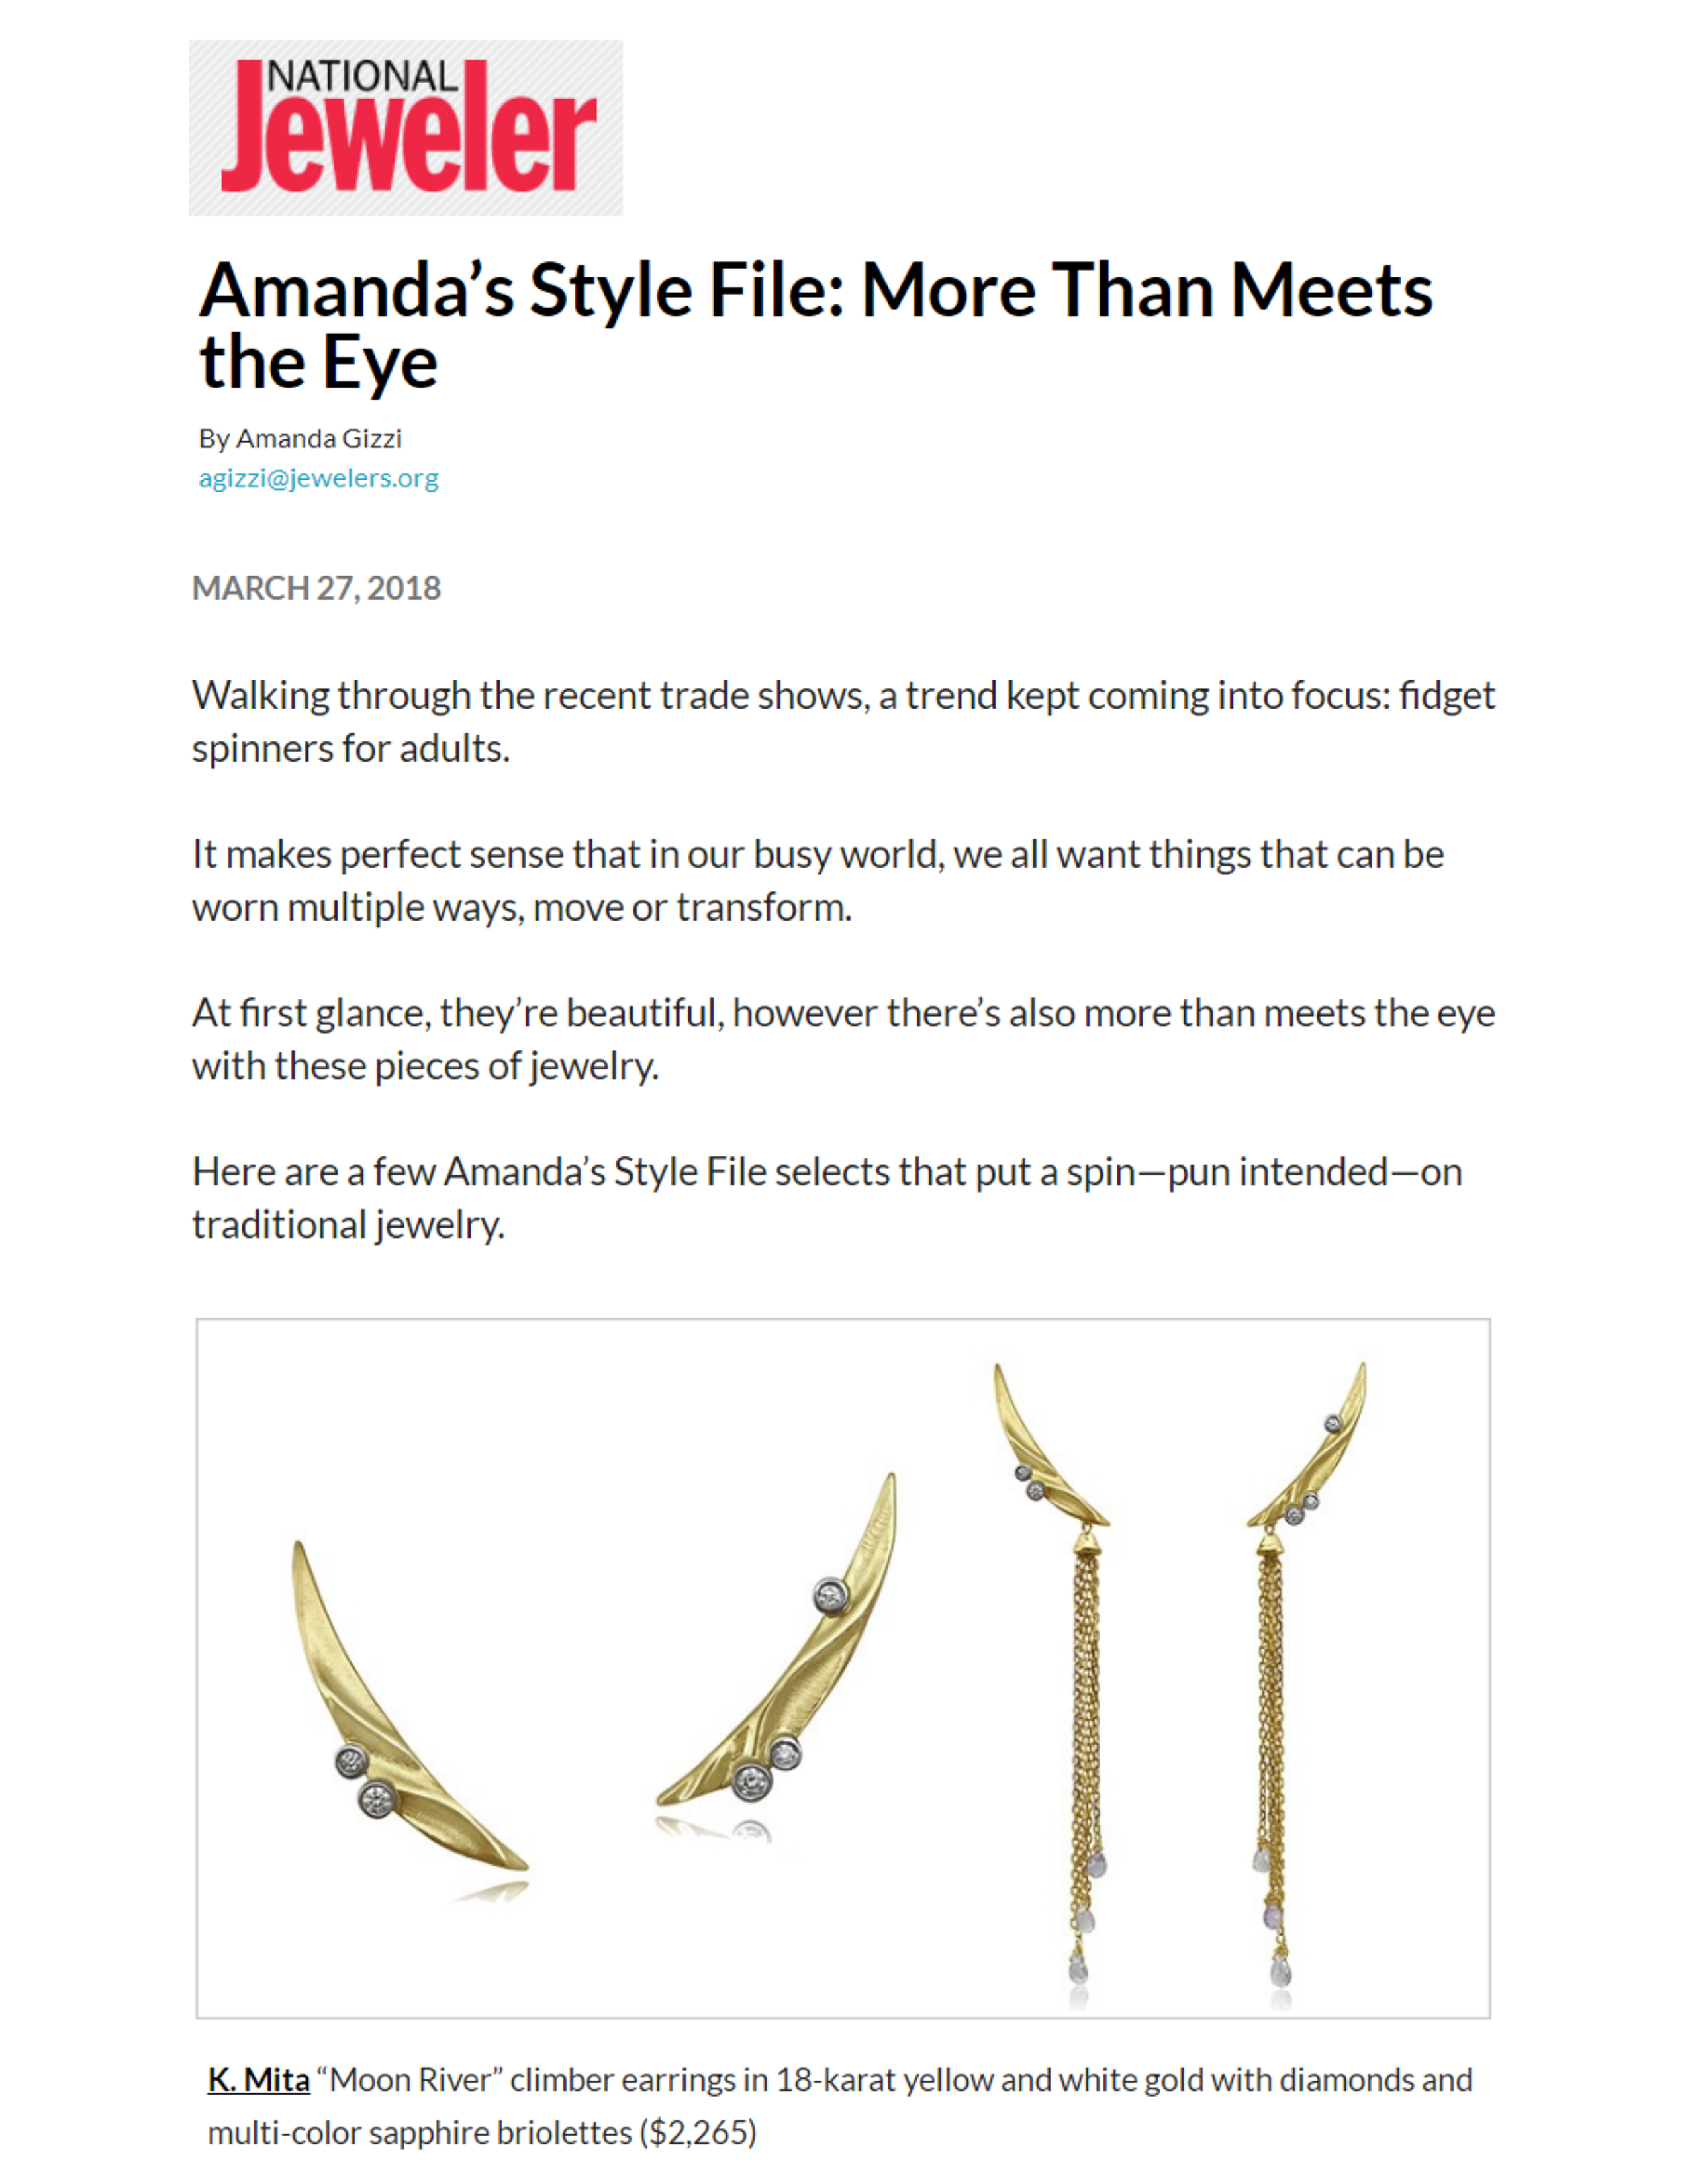 Moon River Climber Earrings from K.Mita | 18k Yellow and White Gold Diamonds and Sapphire Briolettes | March 2018 Amanda's Style in National Jeweler